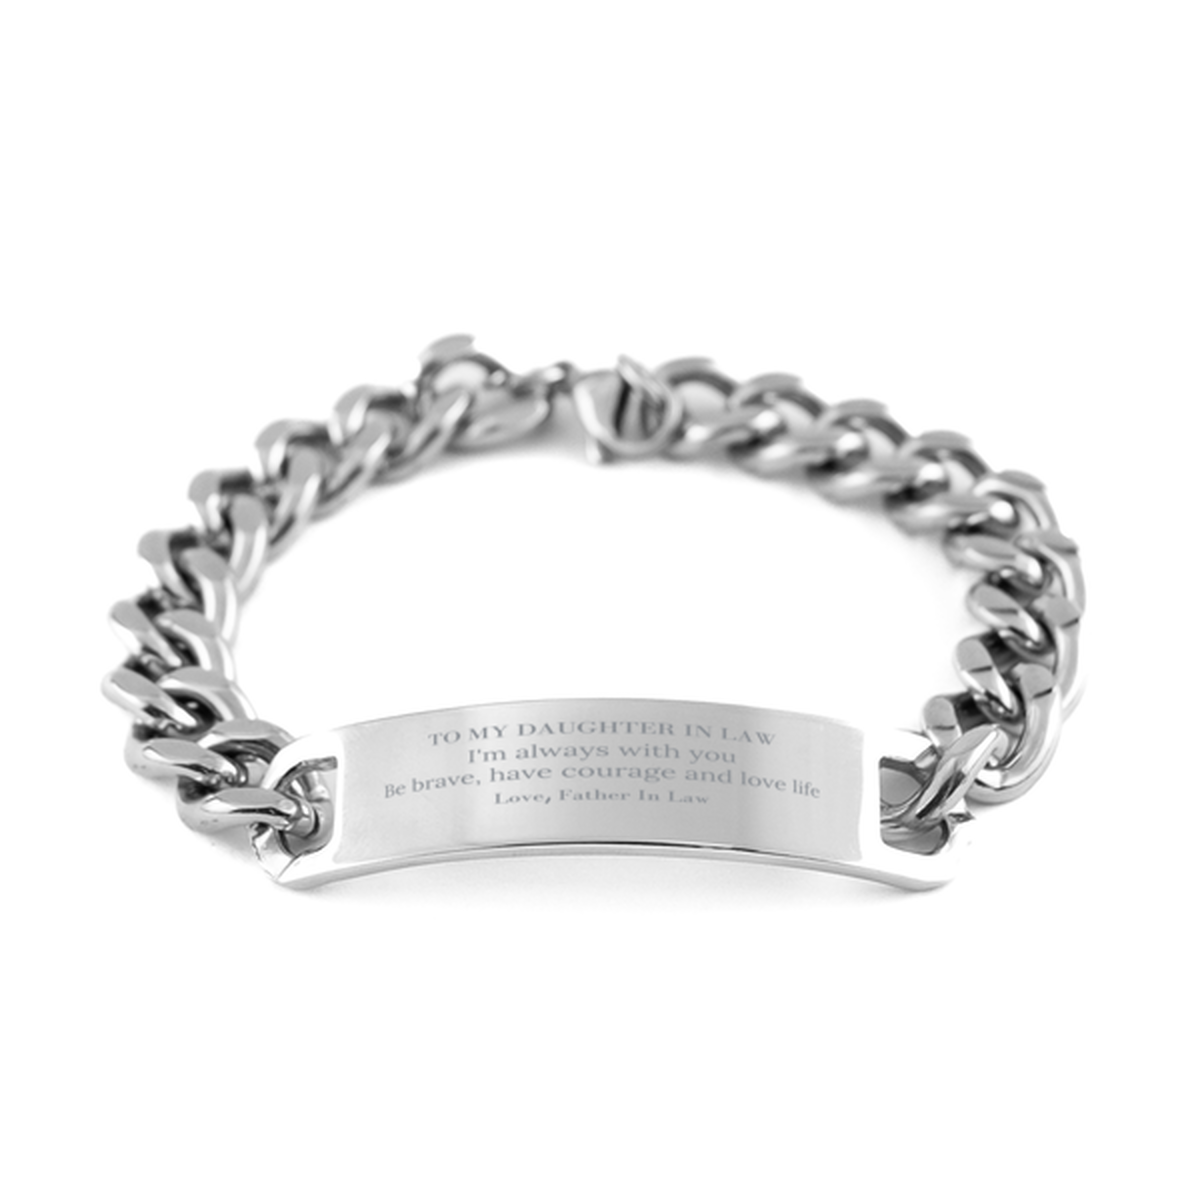 To My Daughter In Law Gifts from Father In Law, Unique Cuban Chain Stainless Steel Bracelet Inspirational Christmas Birthday Graduation Gifts for Daughter In Law I'm always with you. Be brave, have courage and love life. Love, Father In Law